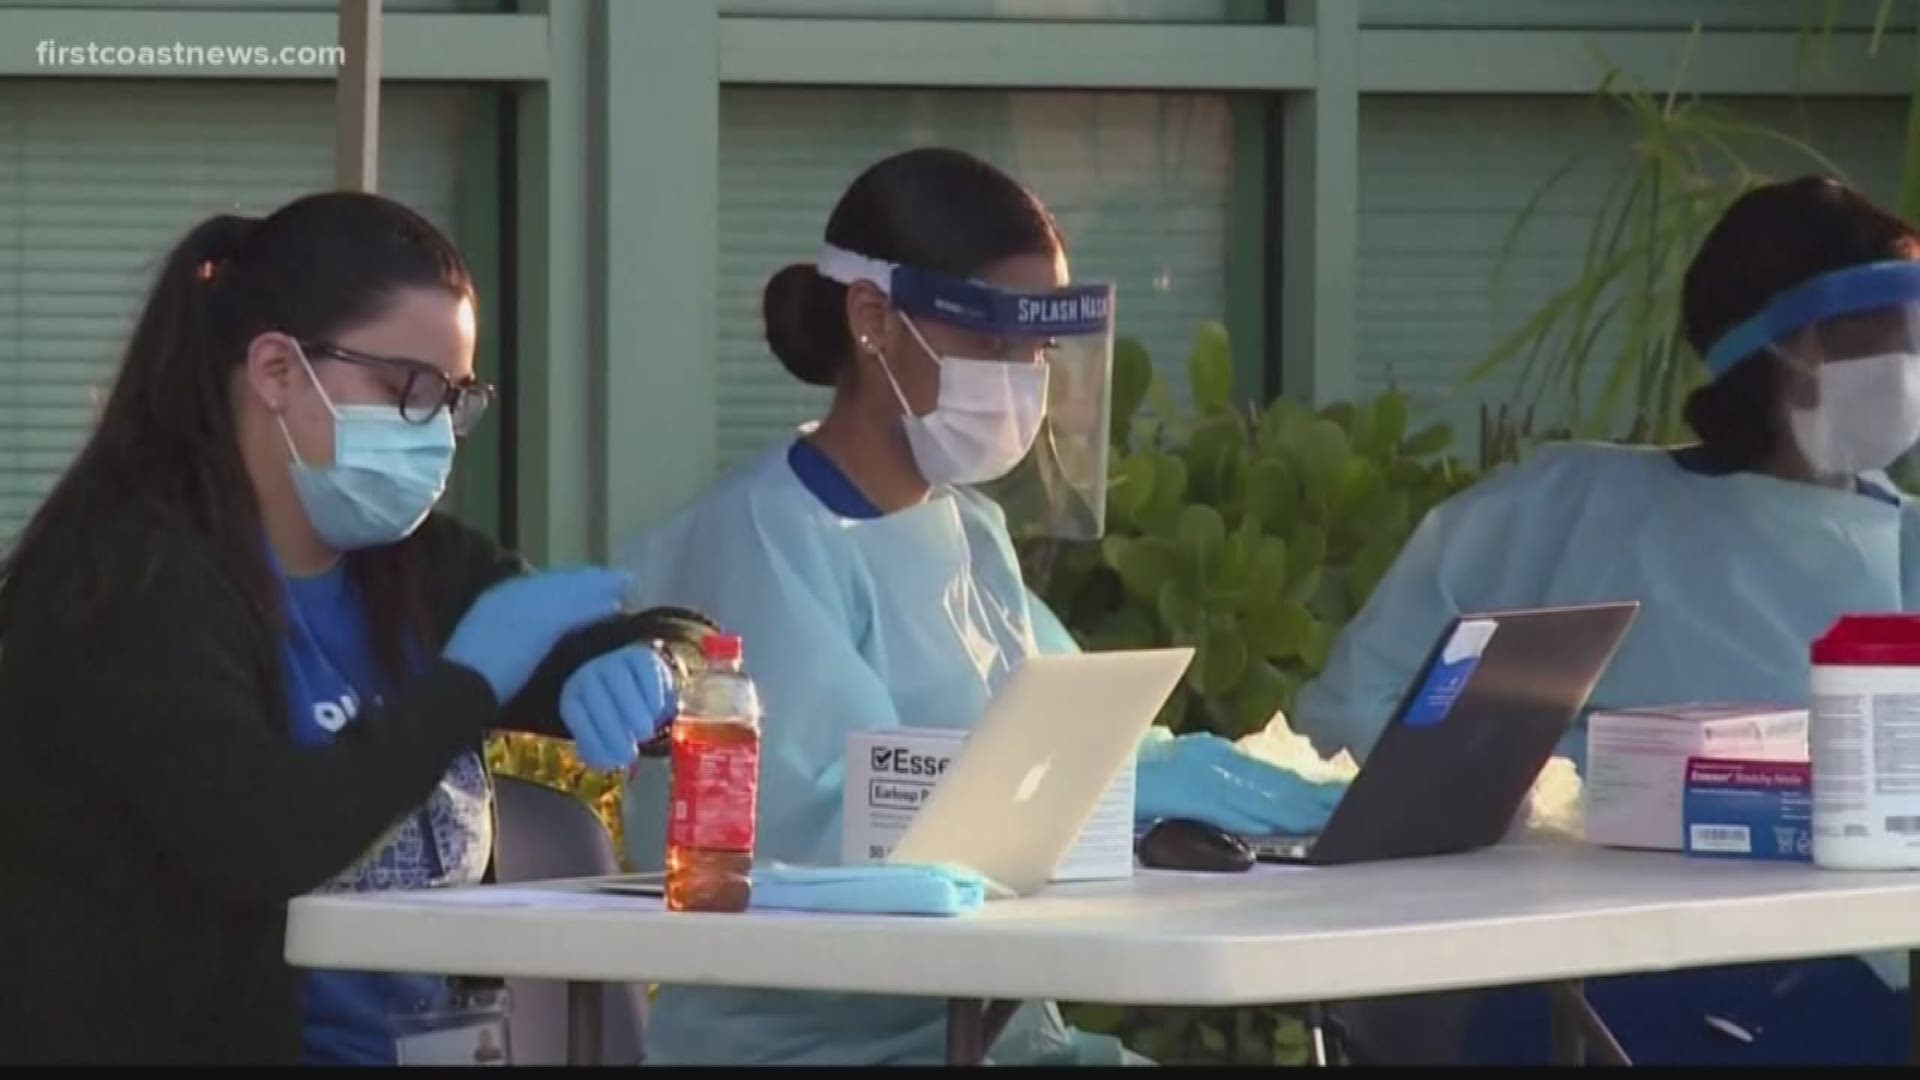 Tech company using 3D printers to create face shields for health care workers.